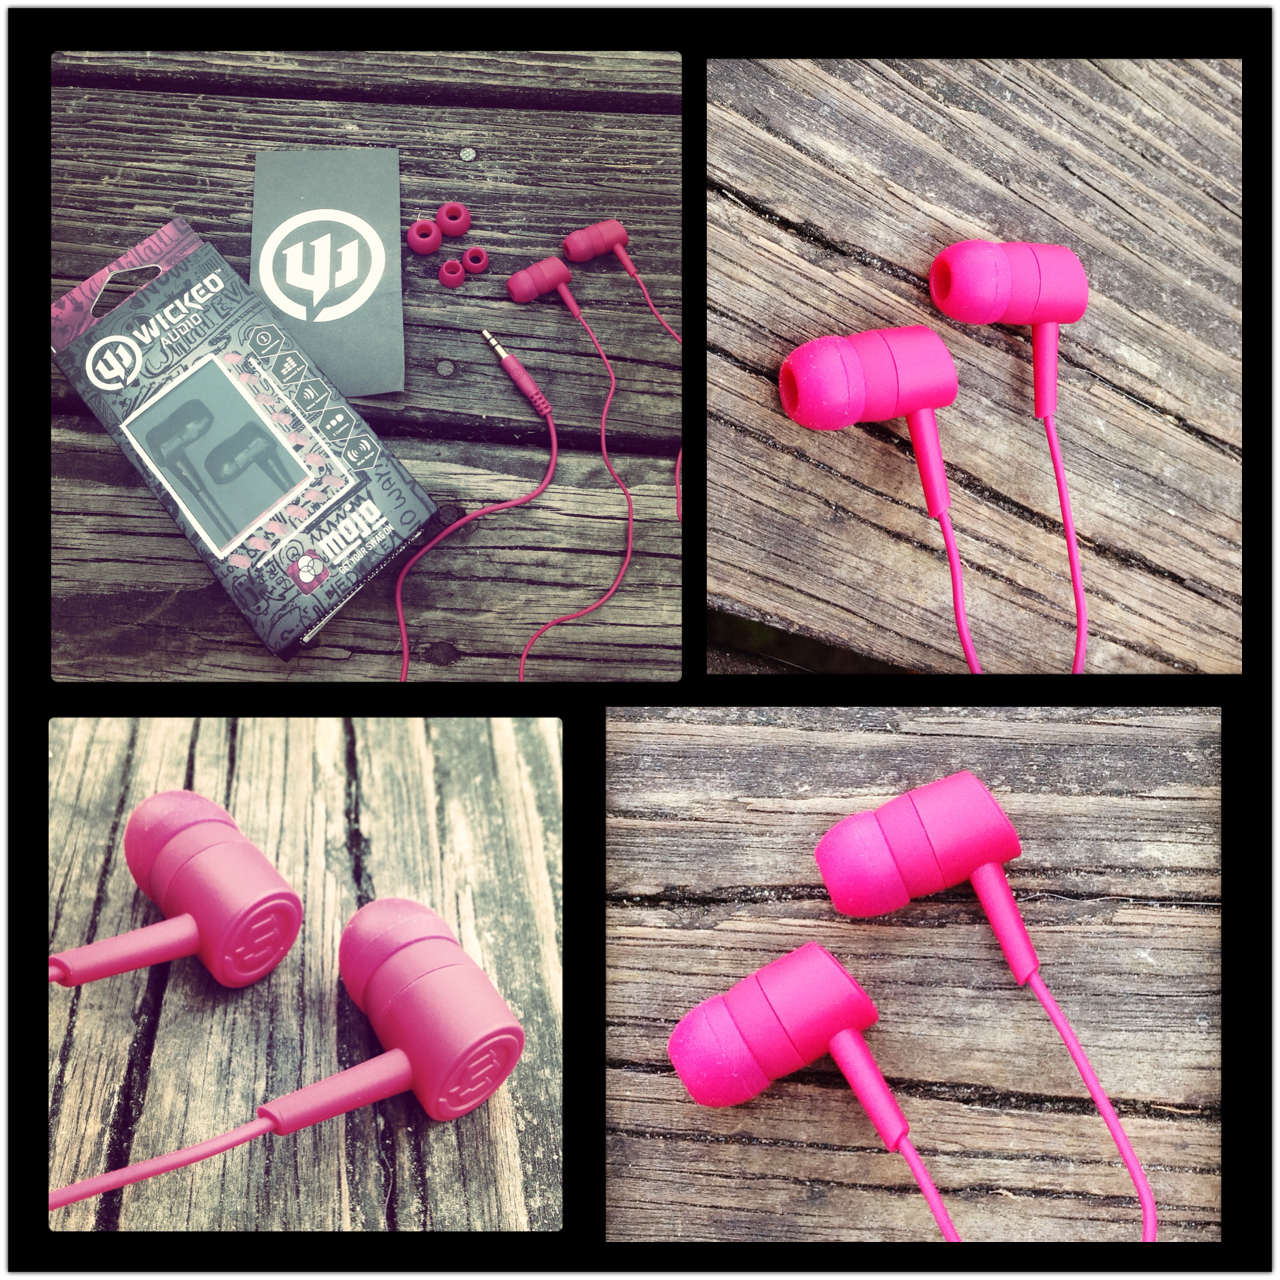 Wicked Audio Mojo Earbuds